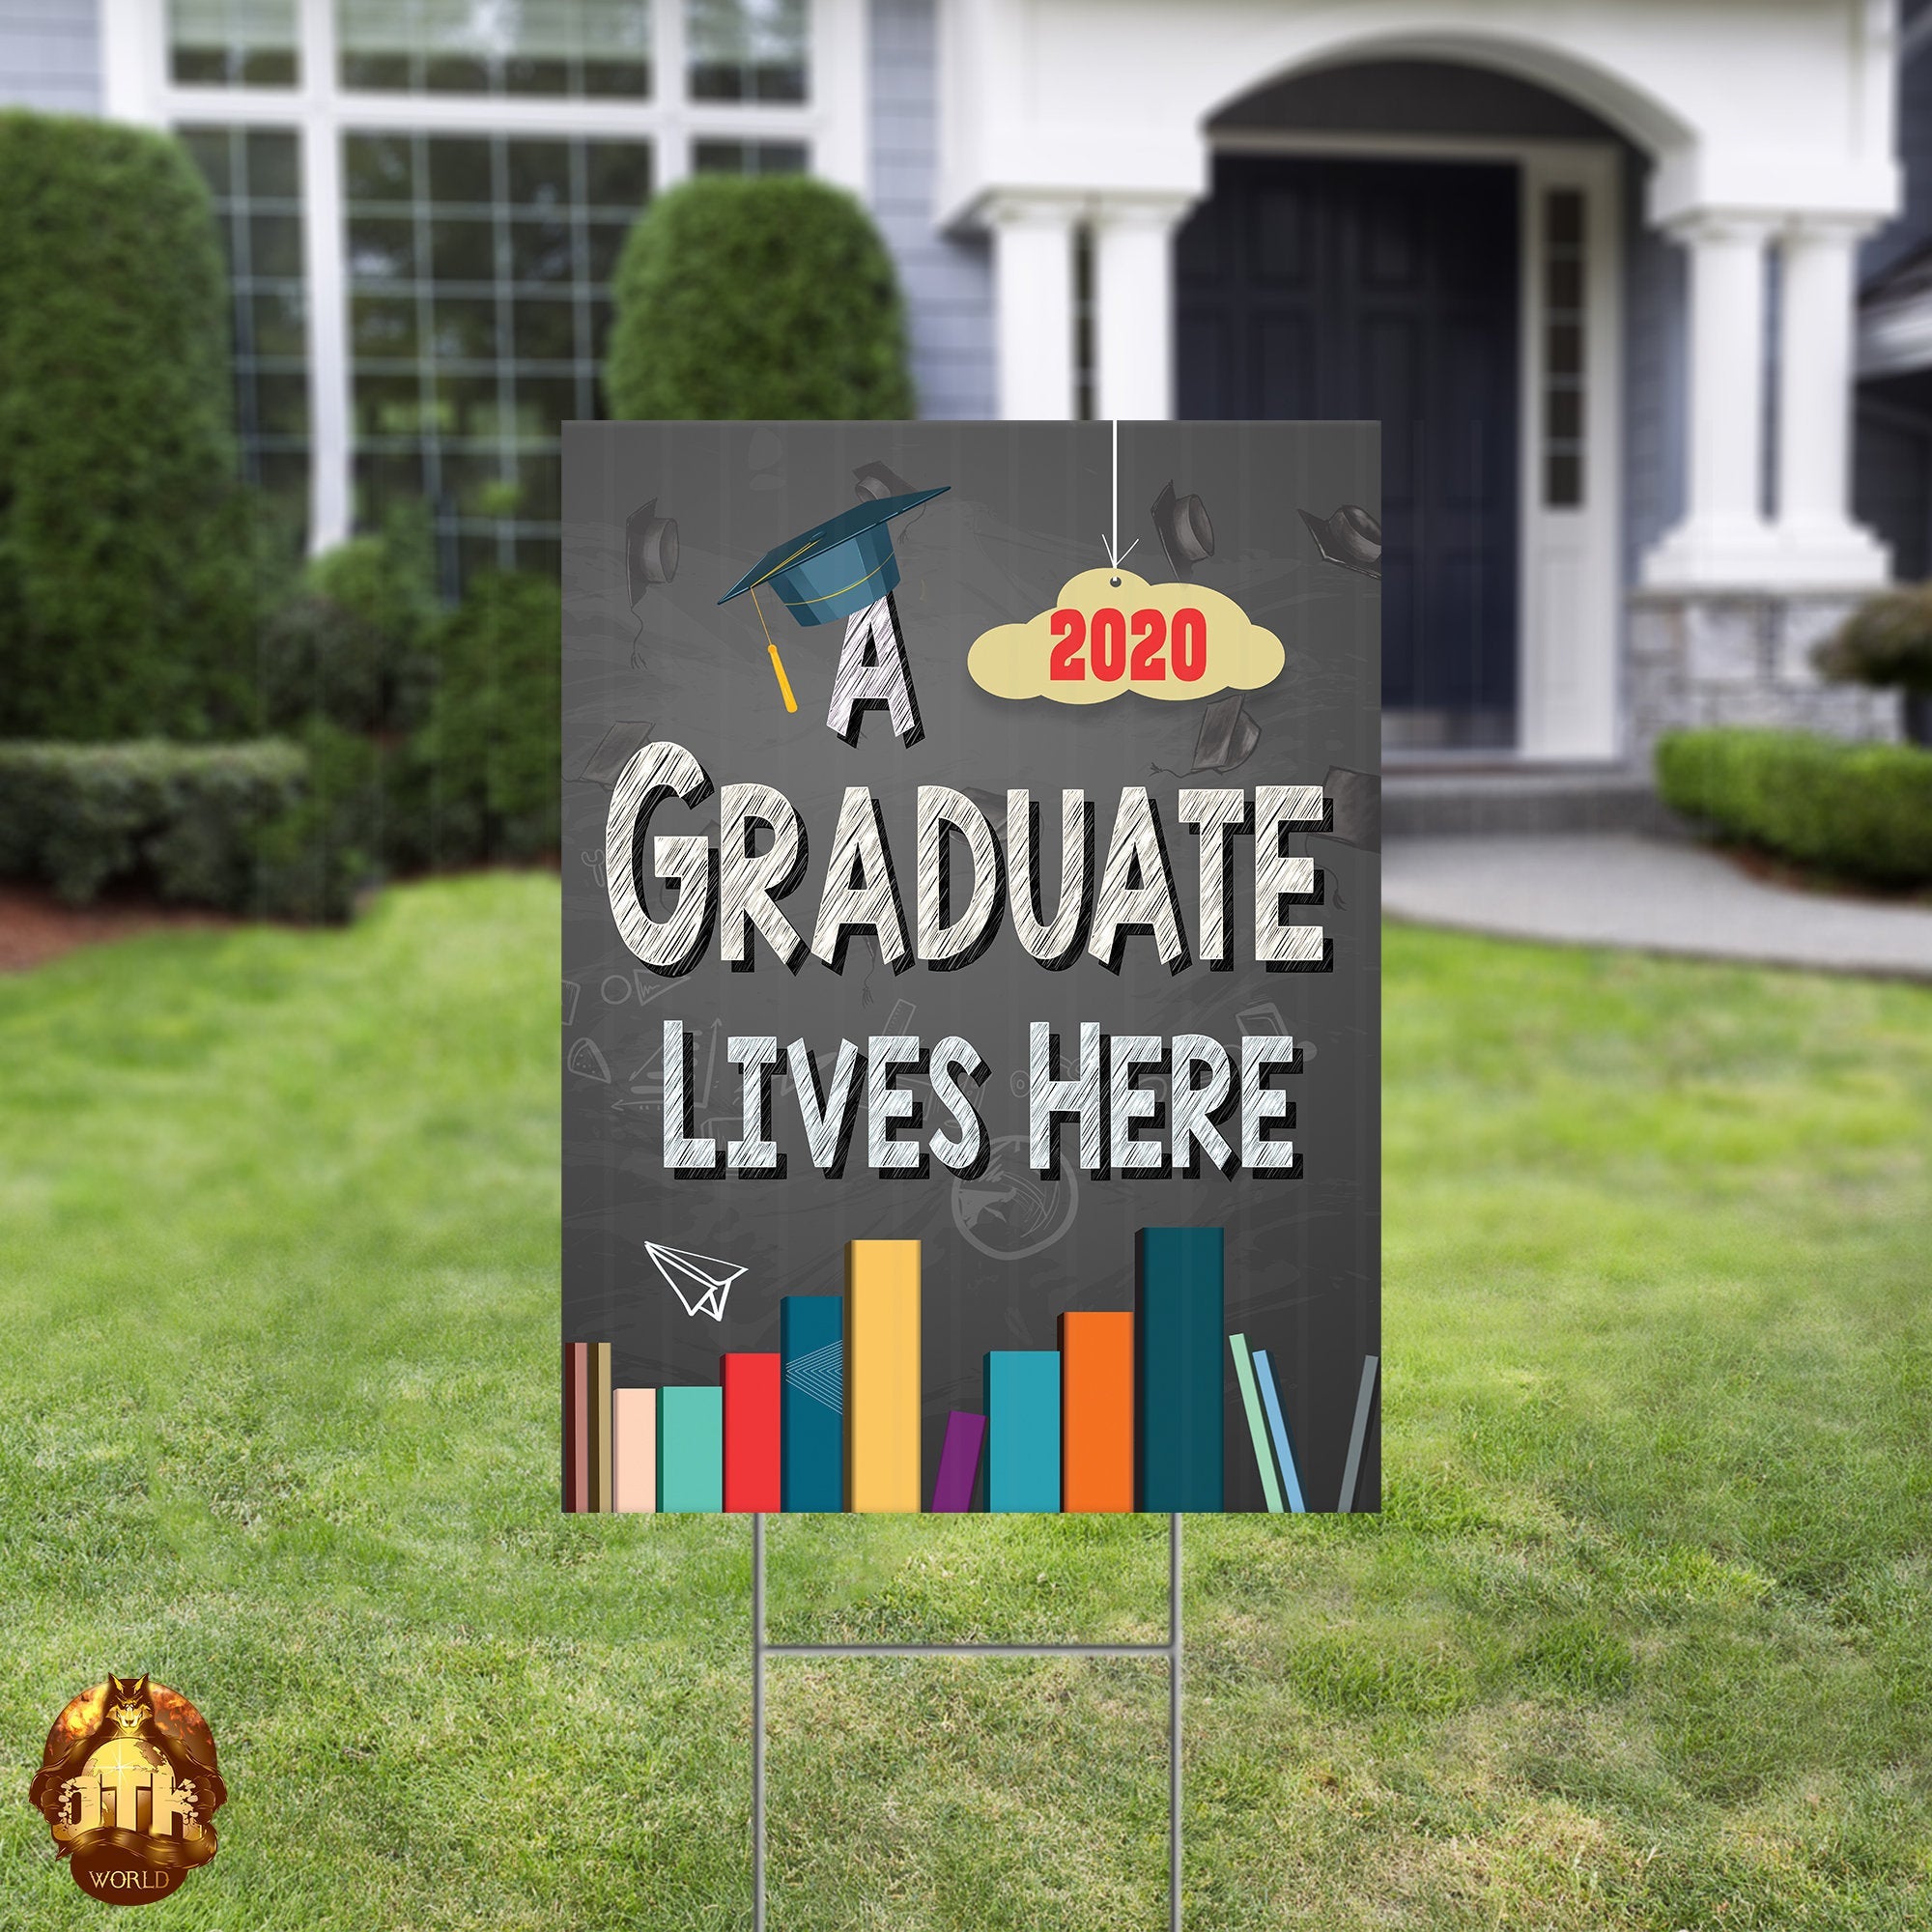 A 2020 Graduate Lives Here Yard Sign